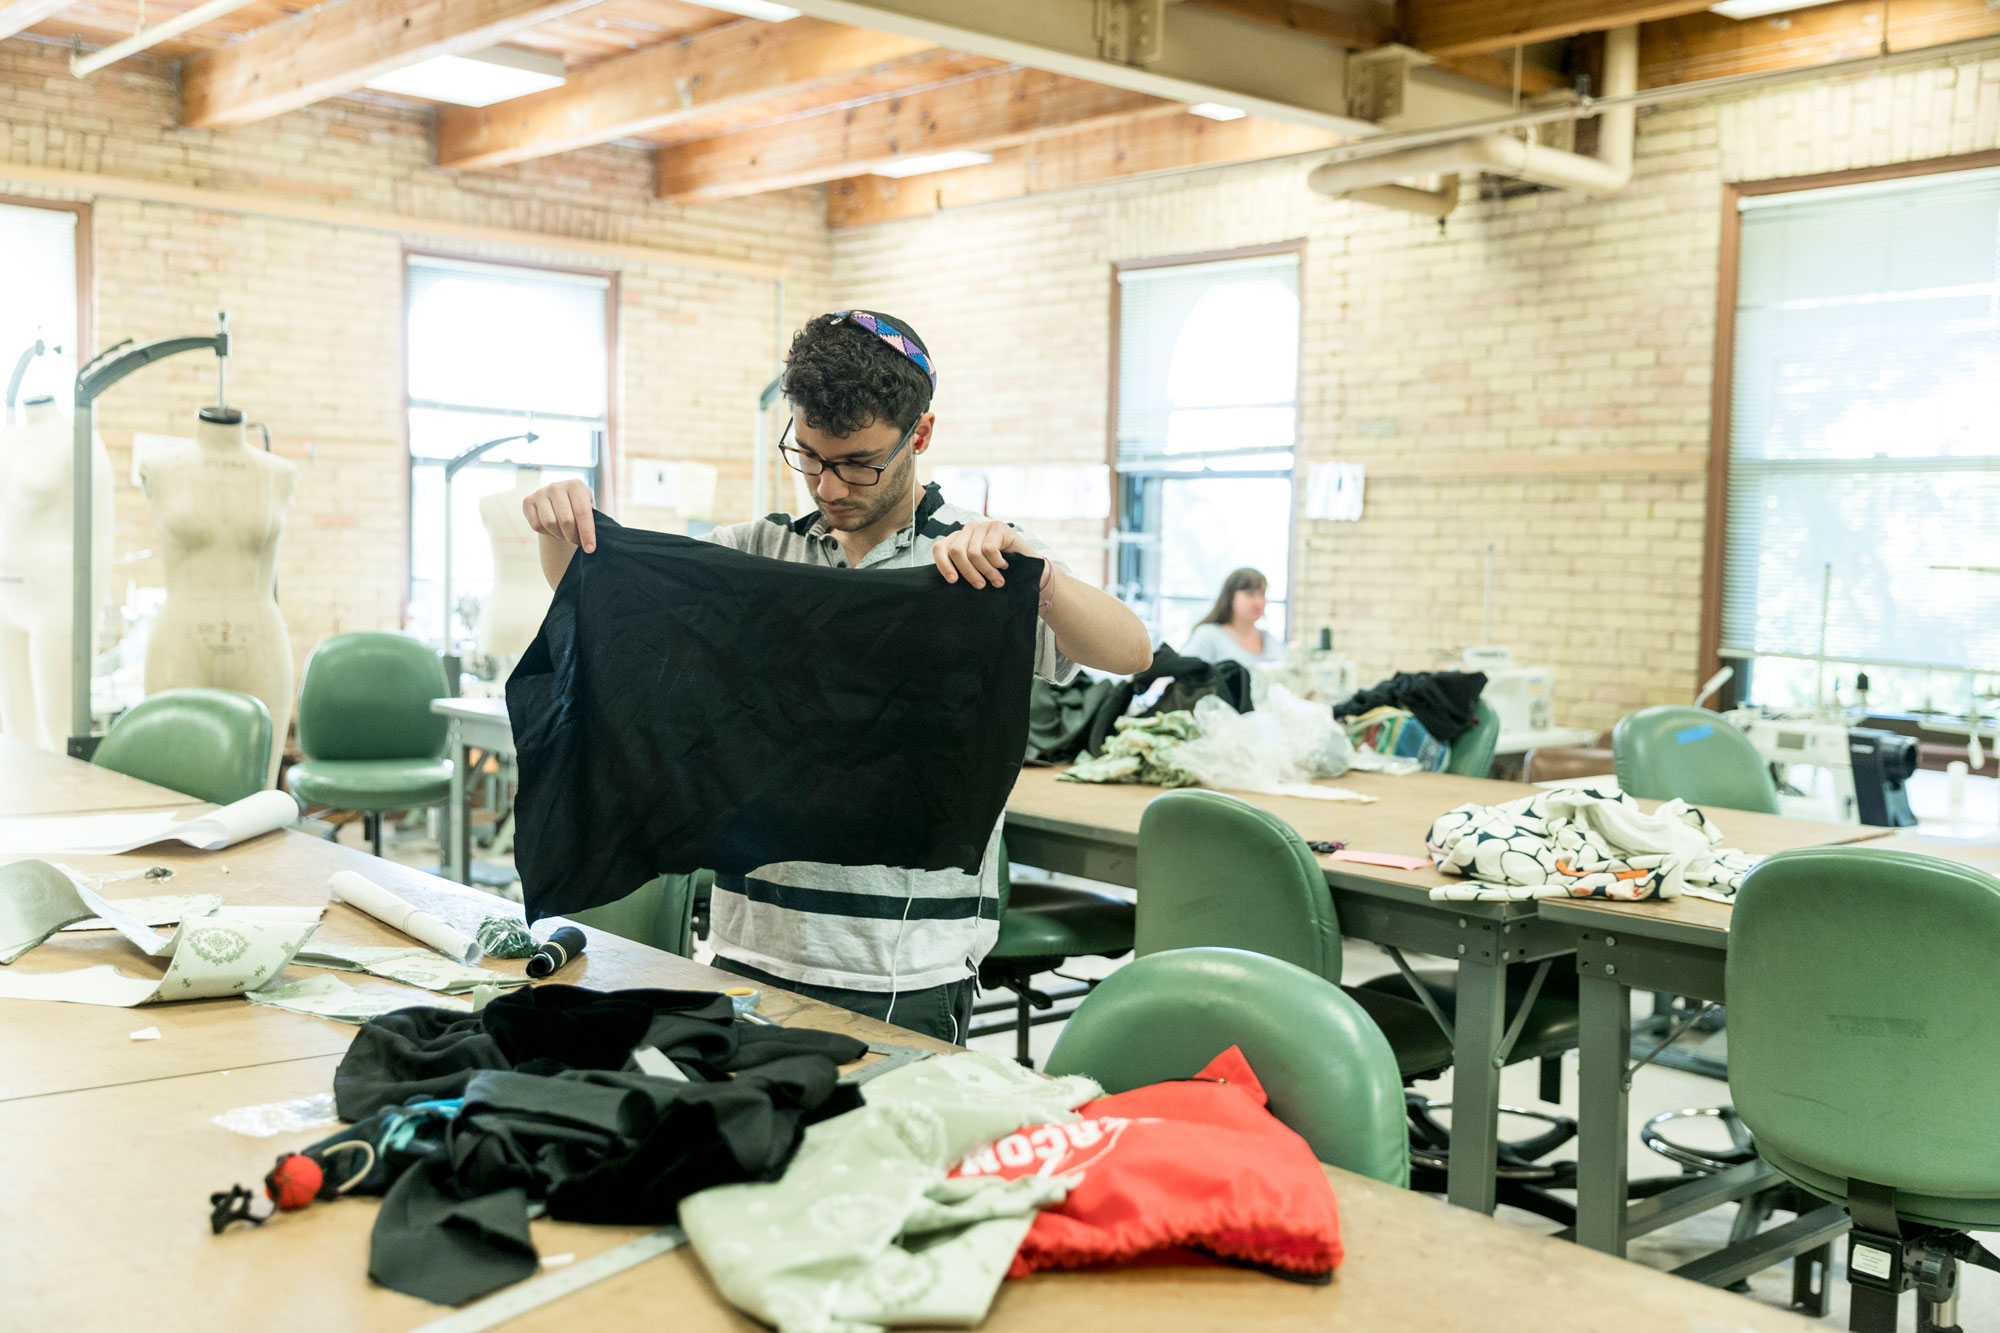 Apparel Design student working on a garment in the studio